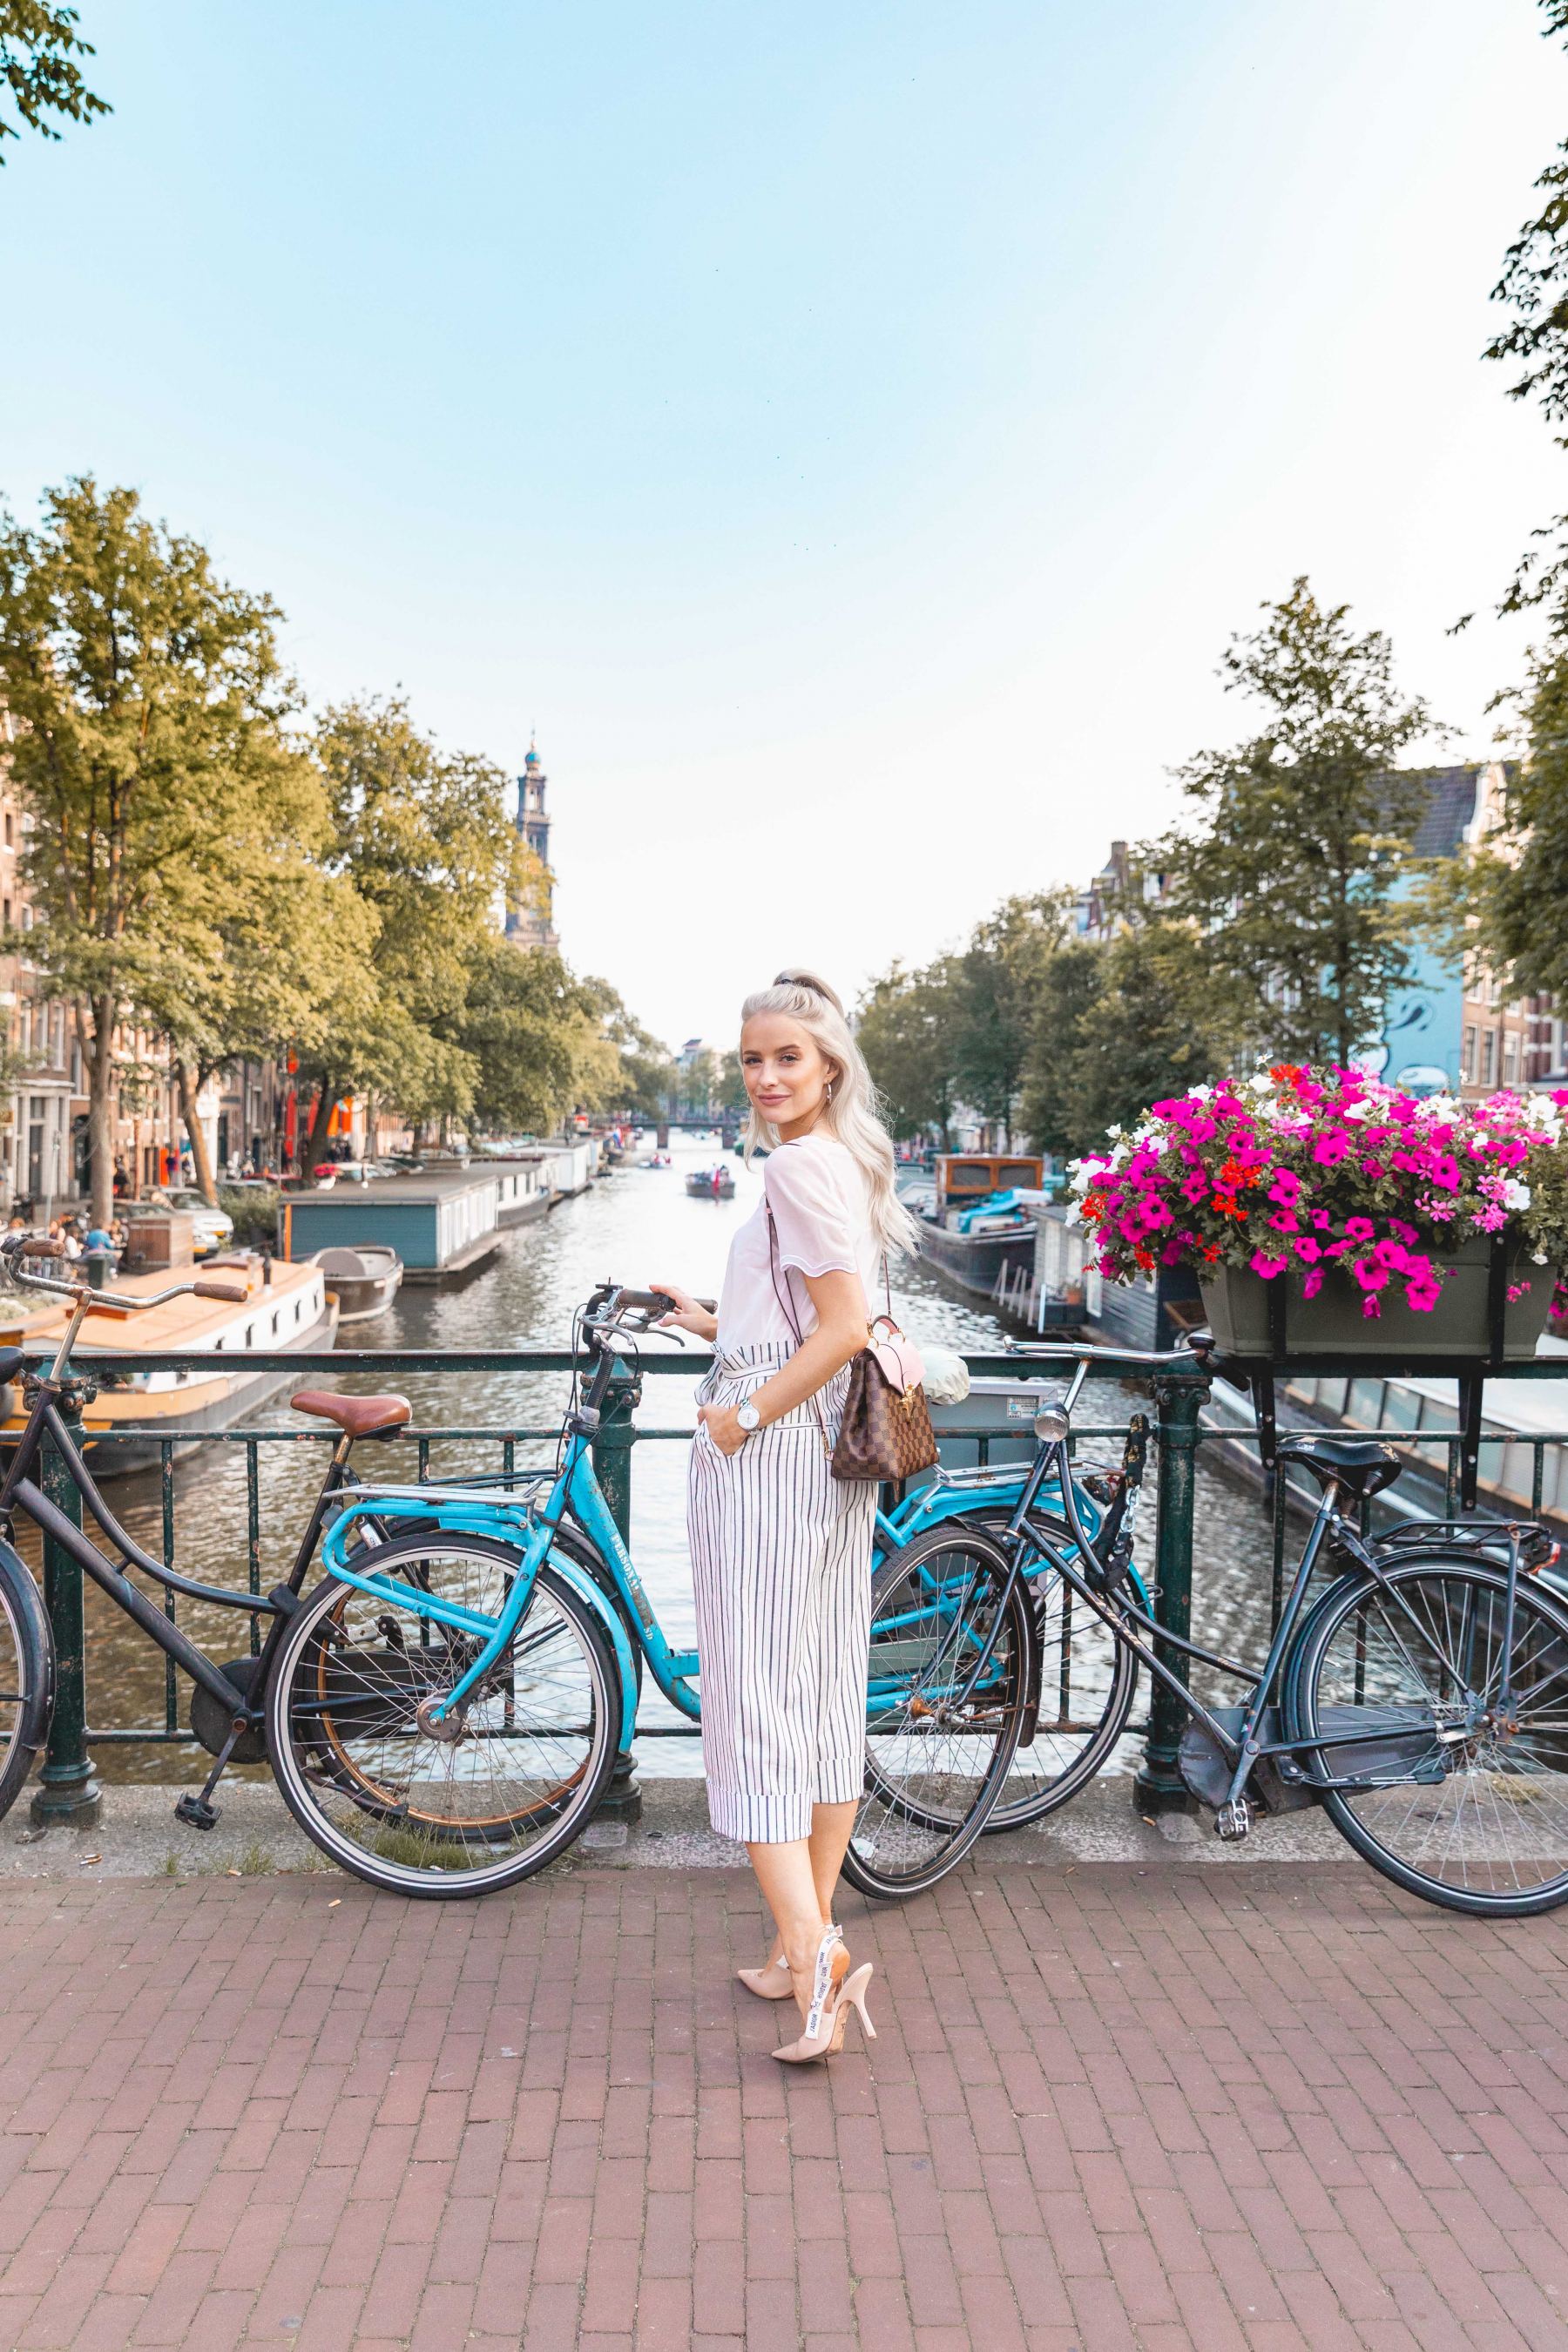 The 10 Best Luxury Backpacks for Summer 2018 - Inthefrow